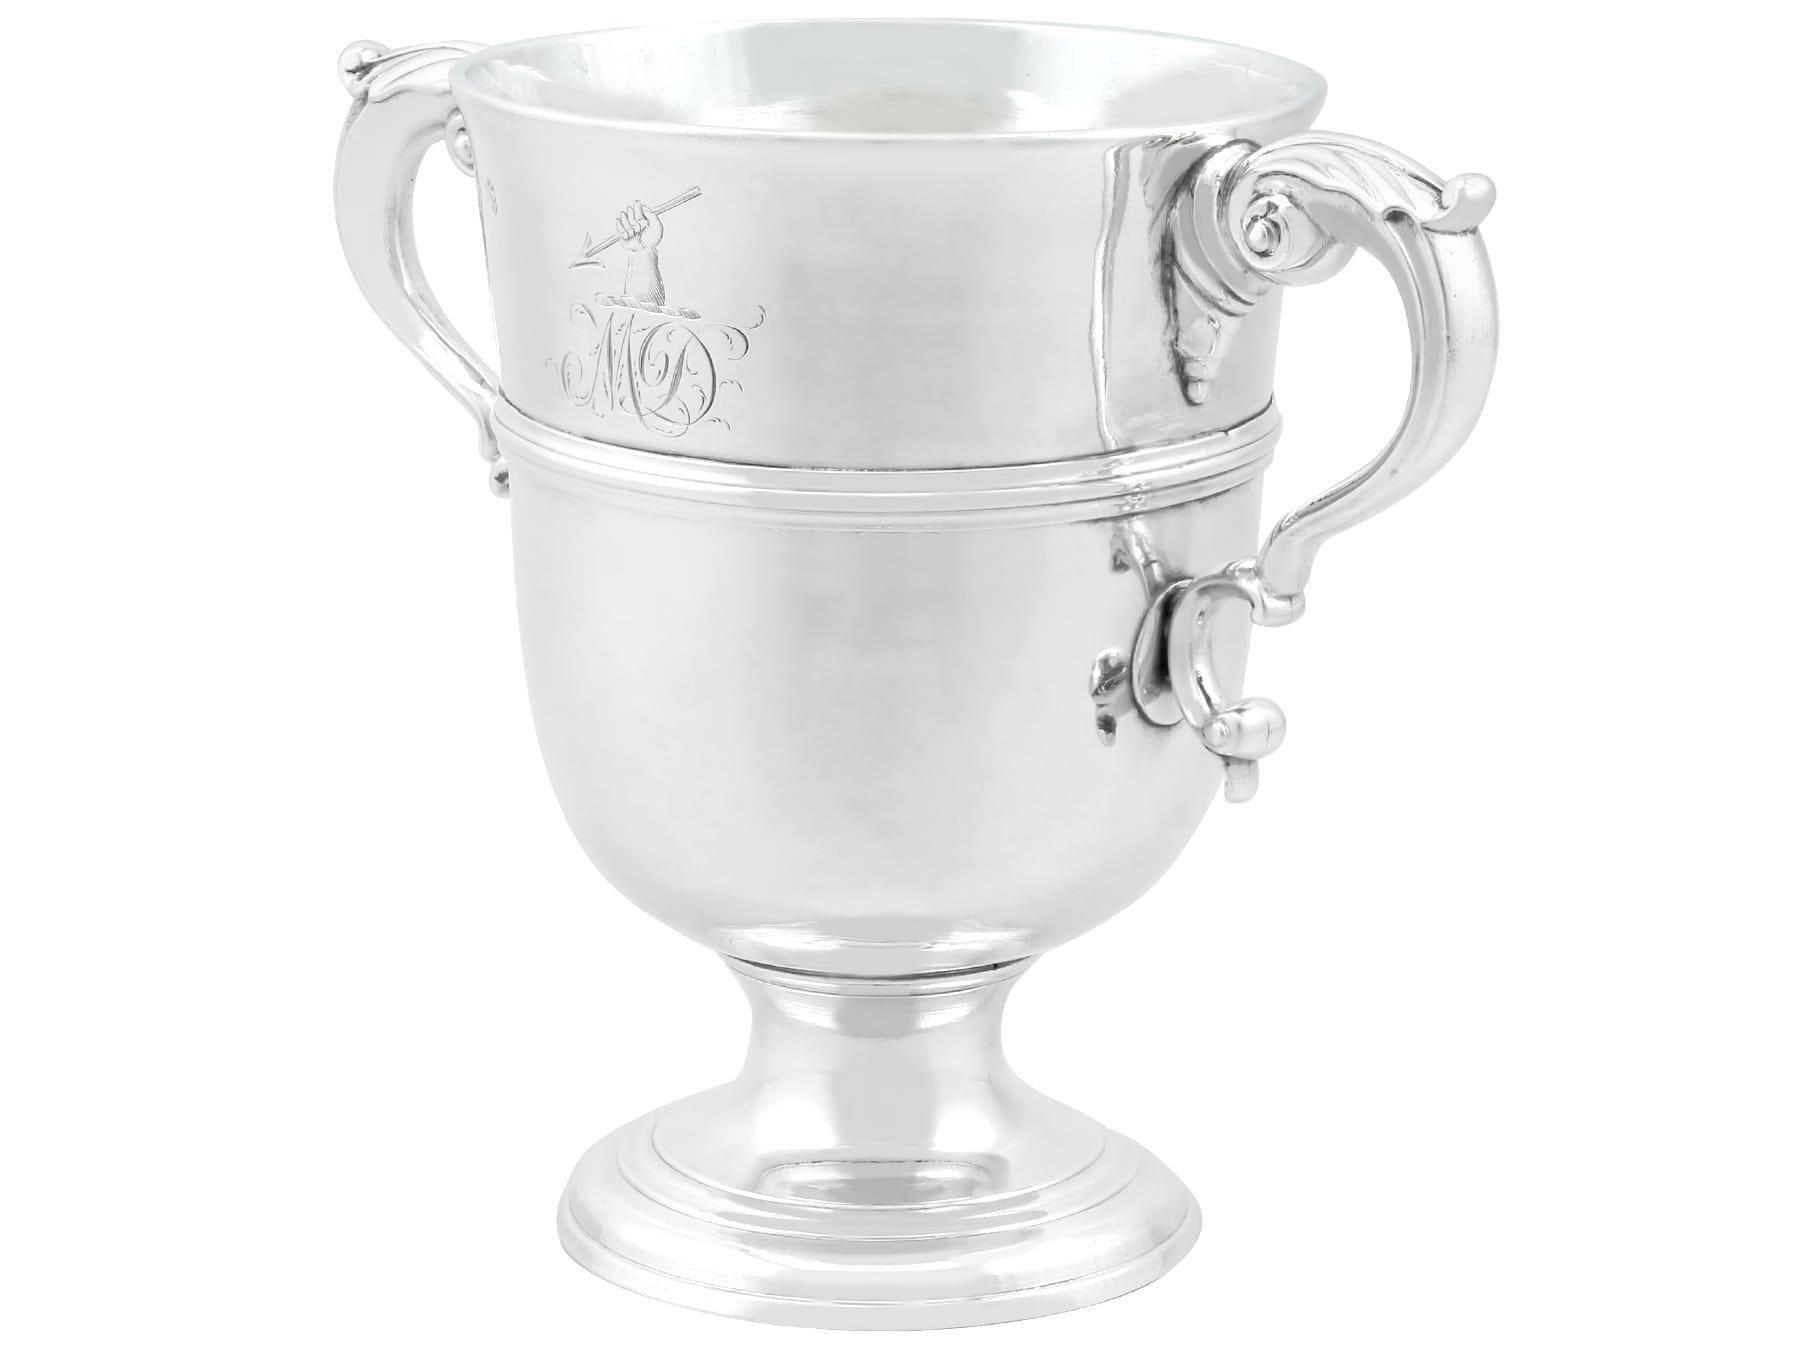 An exceptional, fine and impressive antique 18th century Irish sterling silver cup; an addition to our 17th century silverware collection

This exceptional antique 18th century Irish sterling silver cup has a plain bell-shaped form to a circular